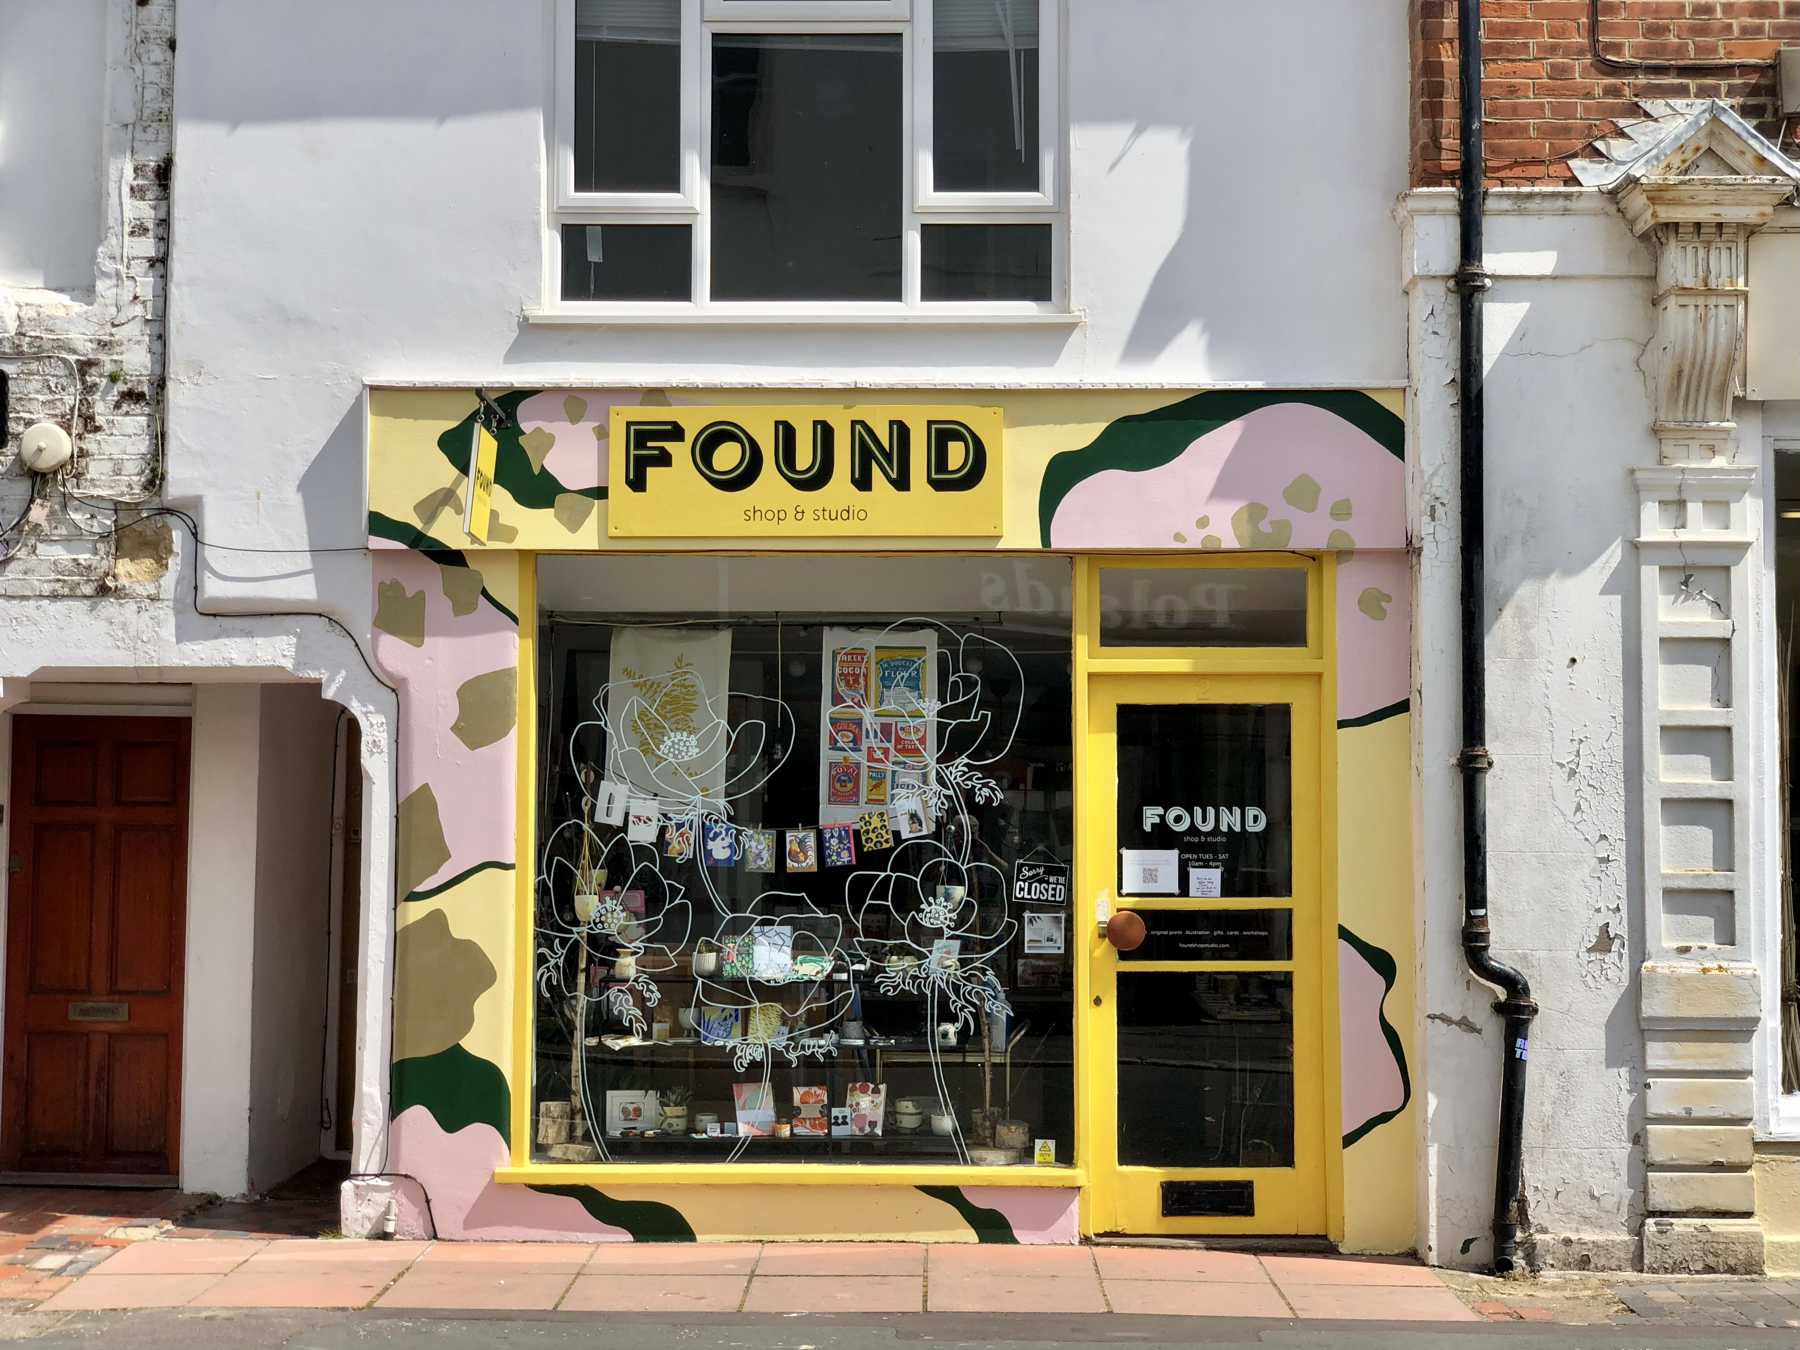 Found, a shop in Worthing